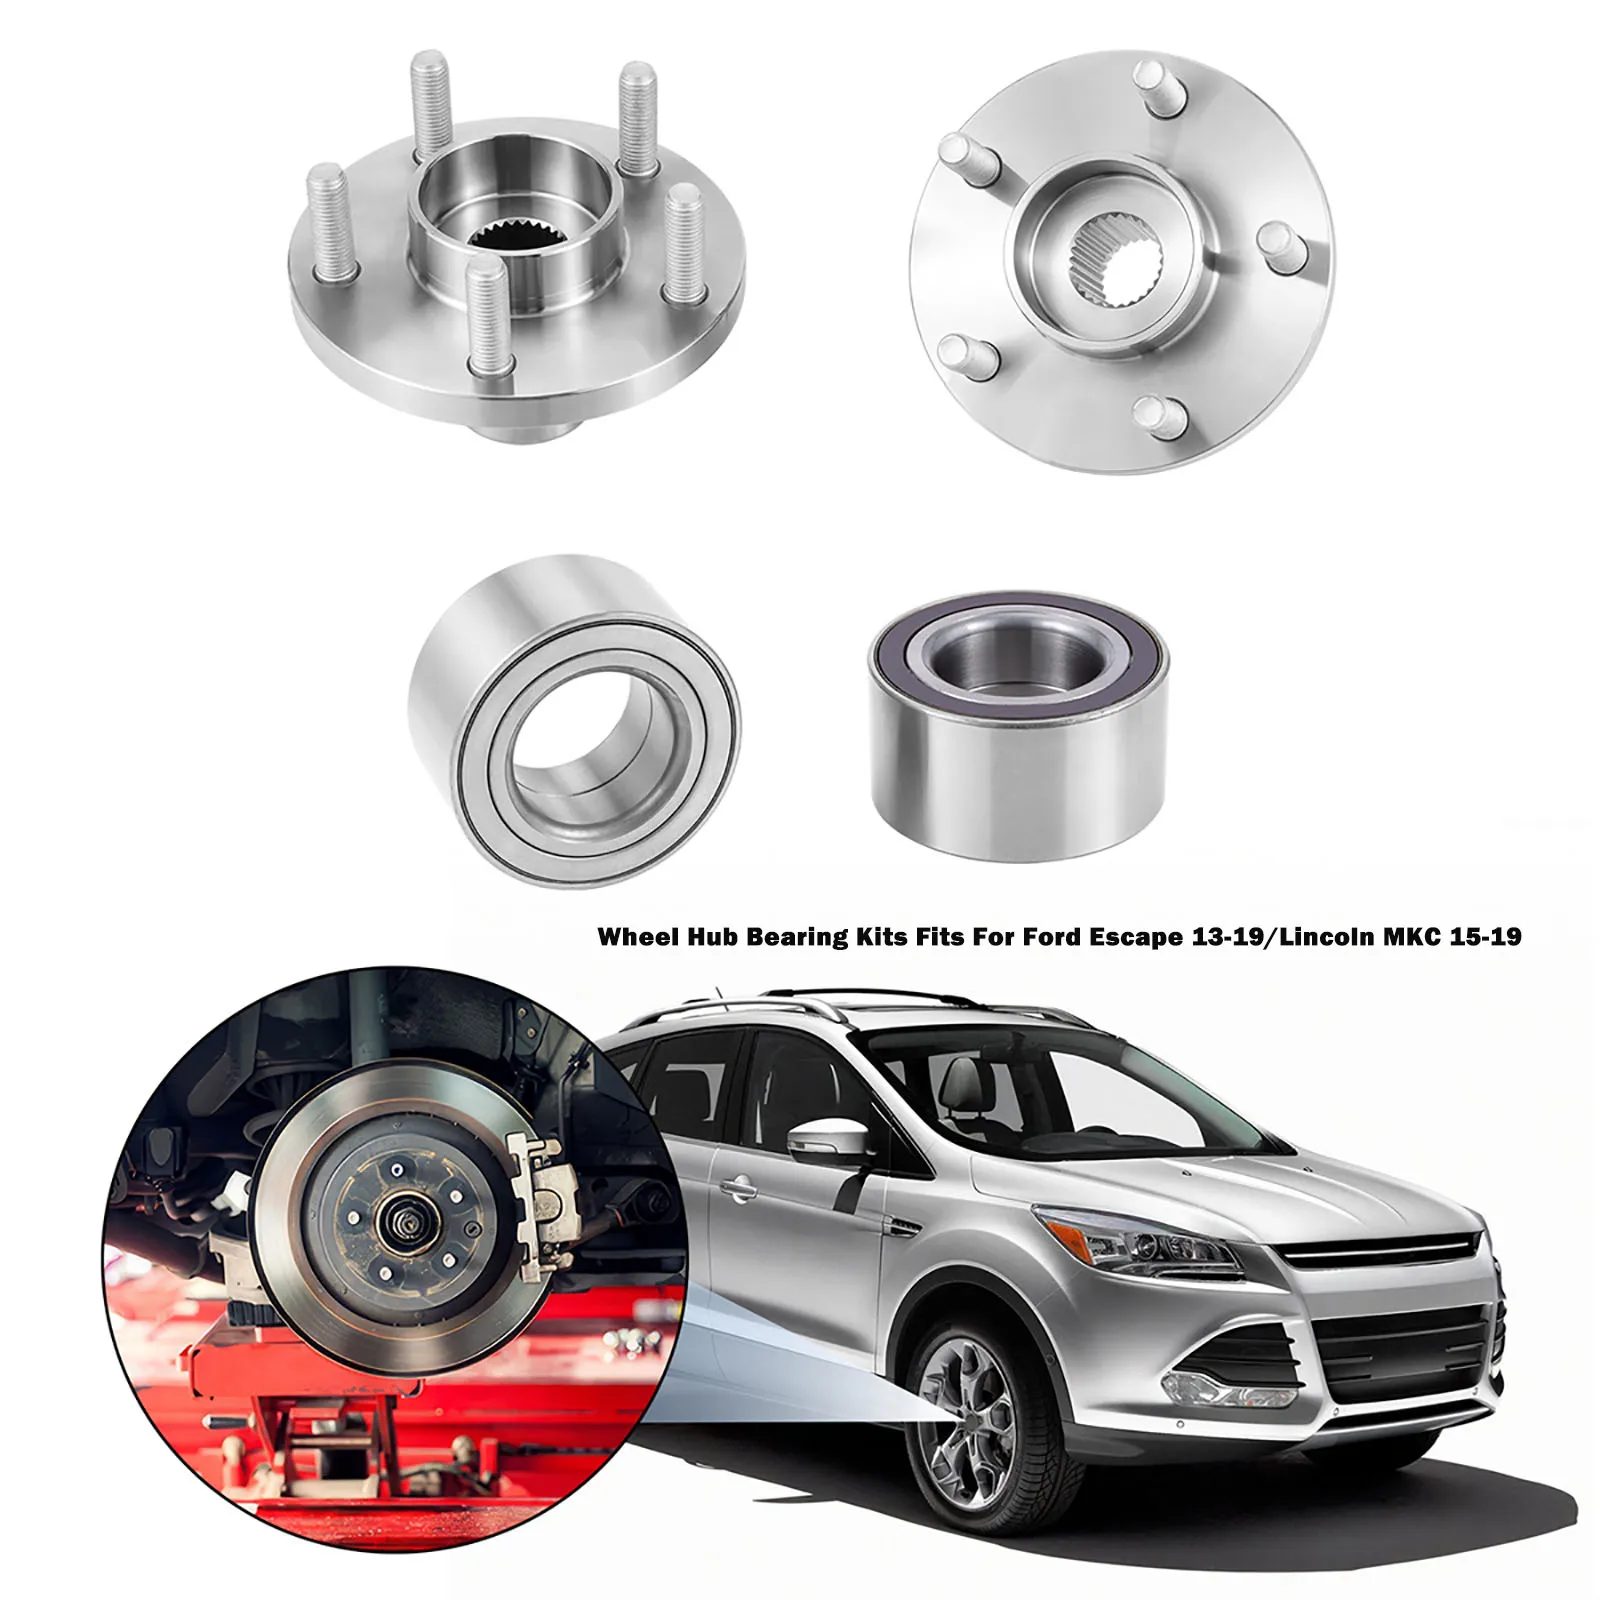 

2 Front Wheel Hub Bearing Kits Fit For 2013-2019 Ford Escape 2015-2019 Lincoln MKC